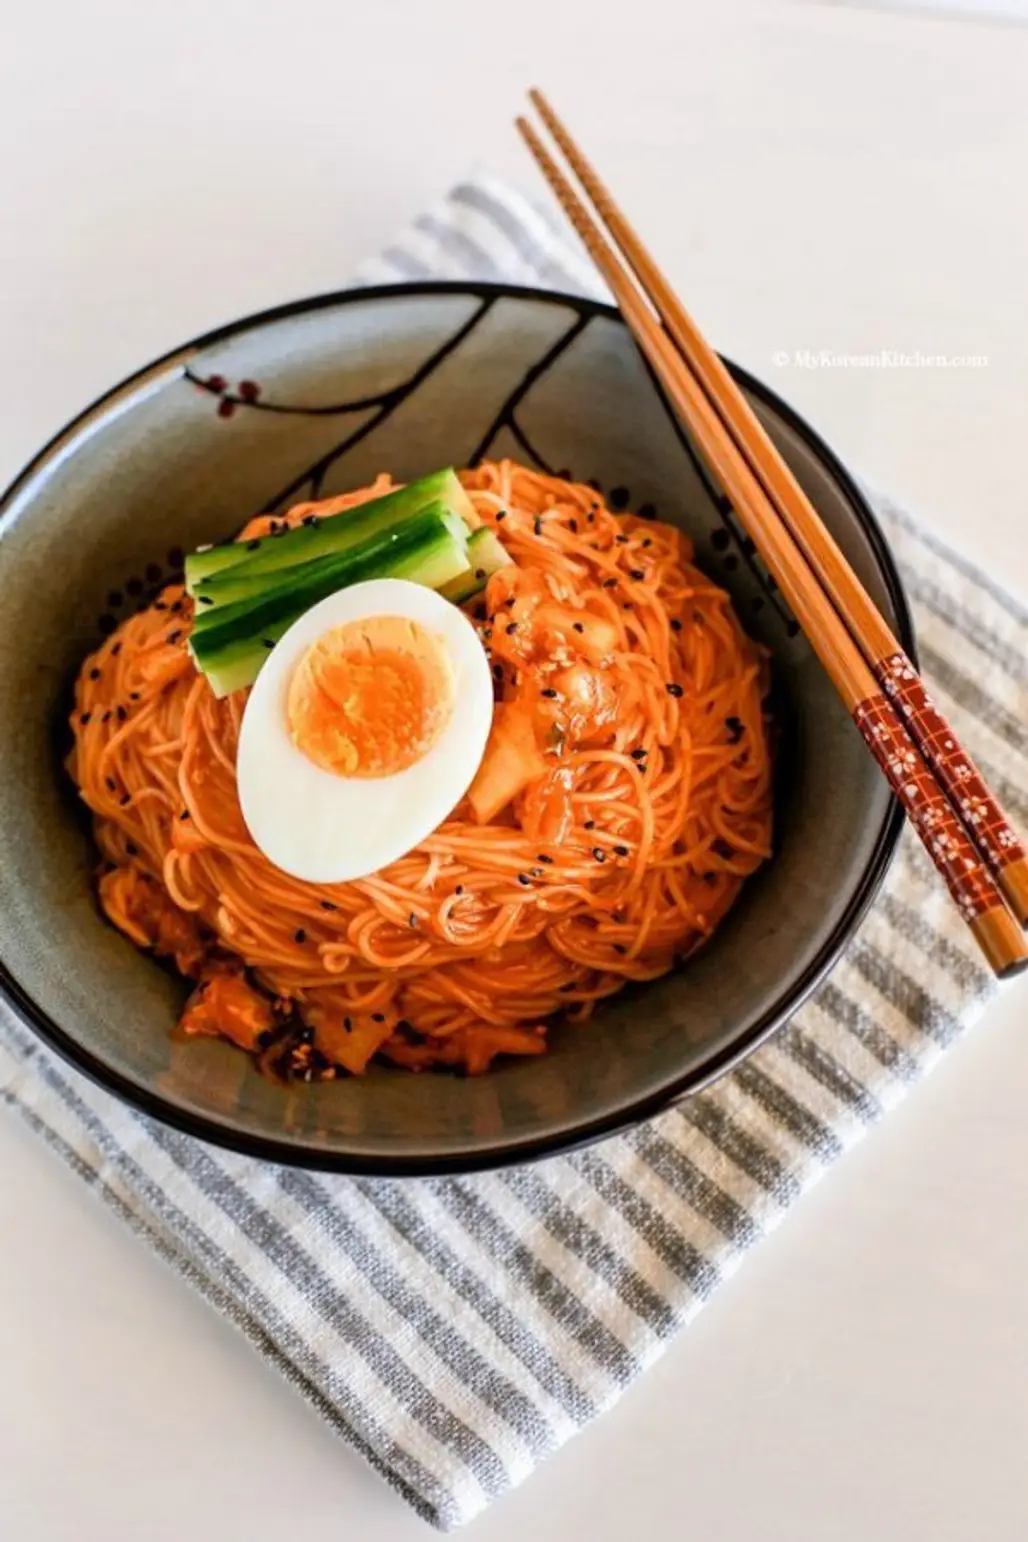 Spicy Cold Kimchi Noodles